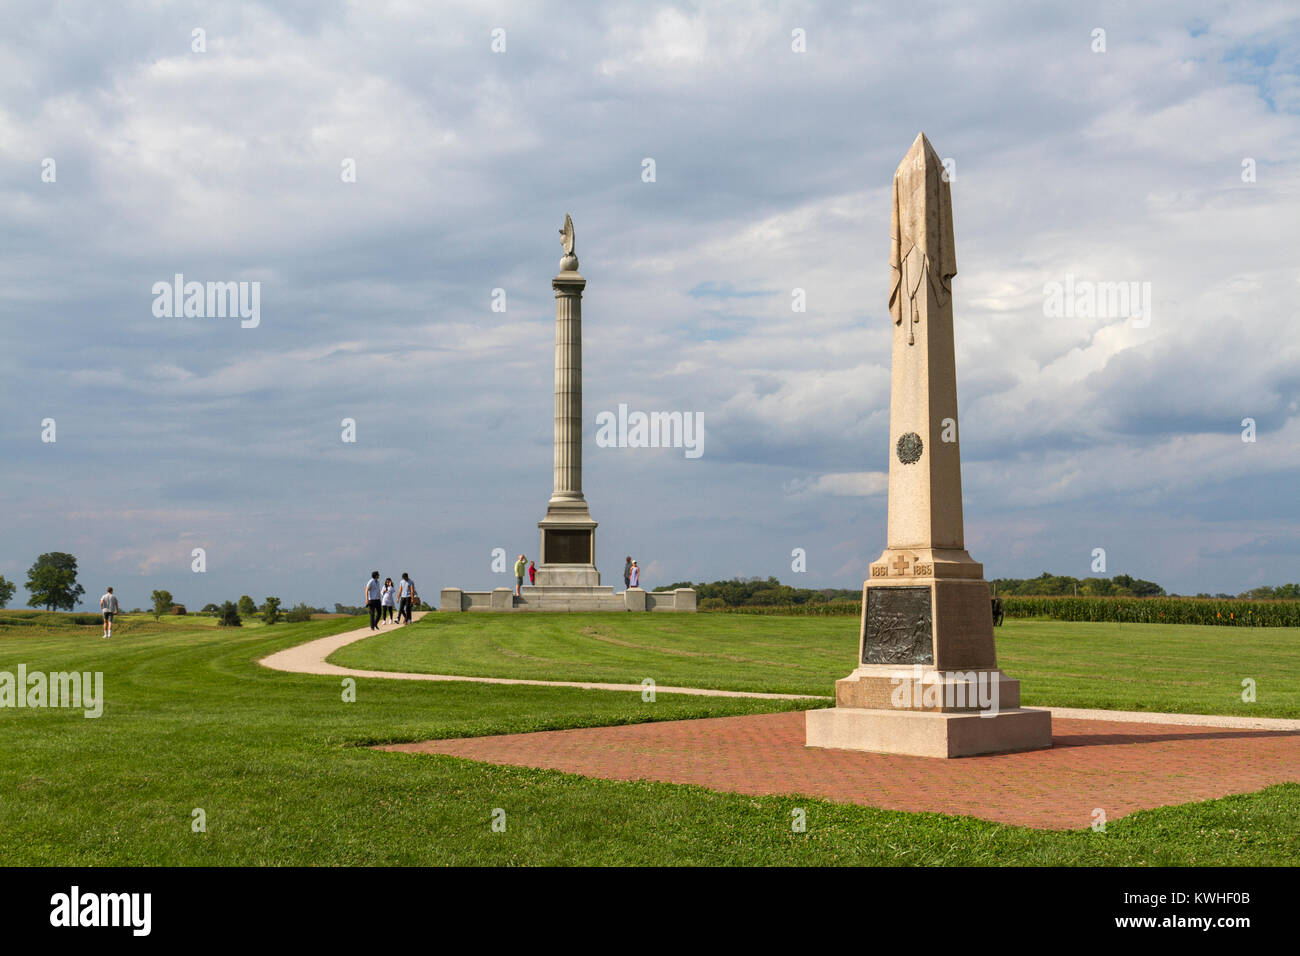 The 20th New York Infantry monument & the New York State Monument, Antietam National Battlefield, Sharpsburg, MD, United States. Stock Photo